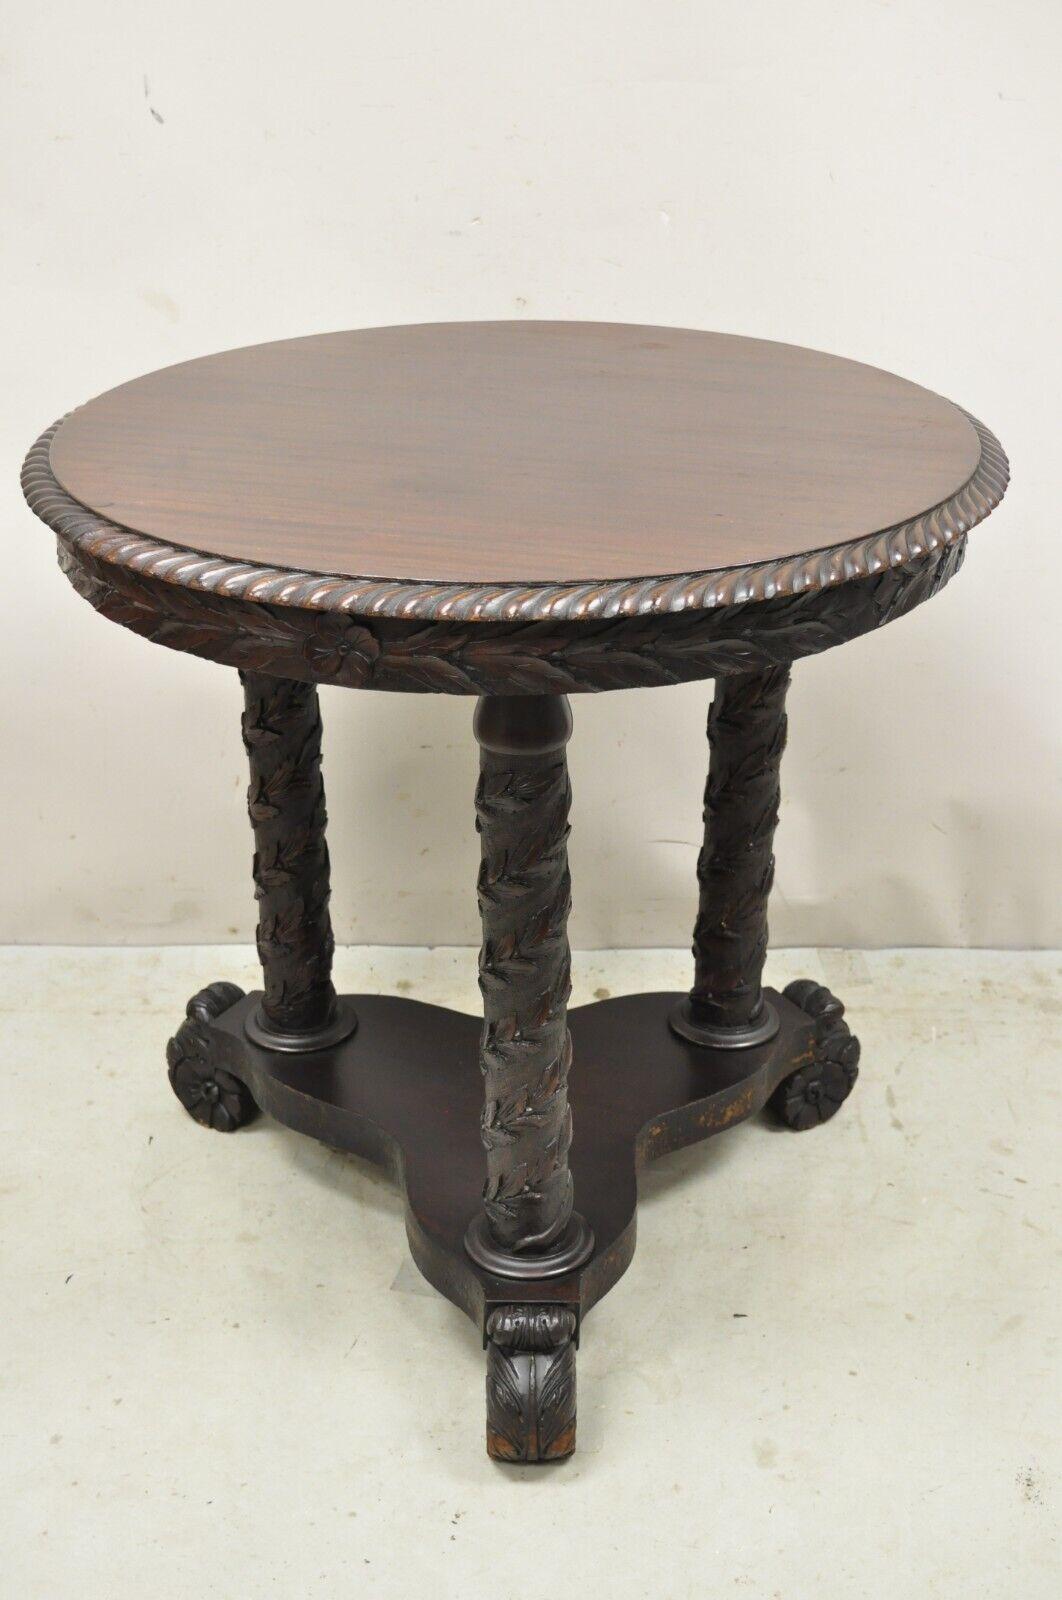 Antique American Empire Floral Spiral Carved Pie Crust Mahogany Round Library Center Table. Circa 19th Century. Measurements: 29